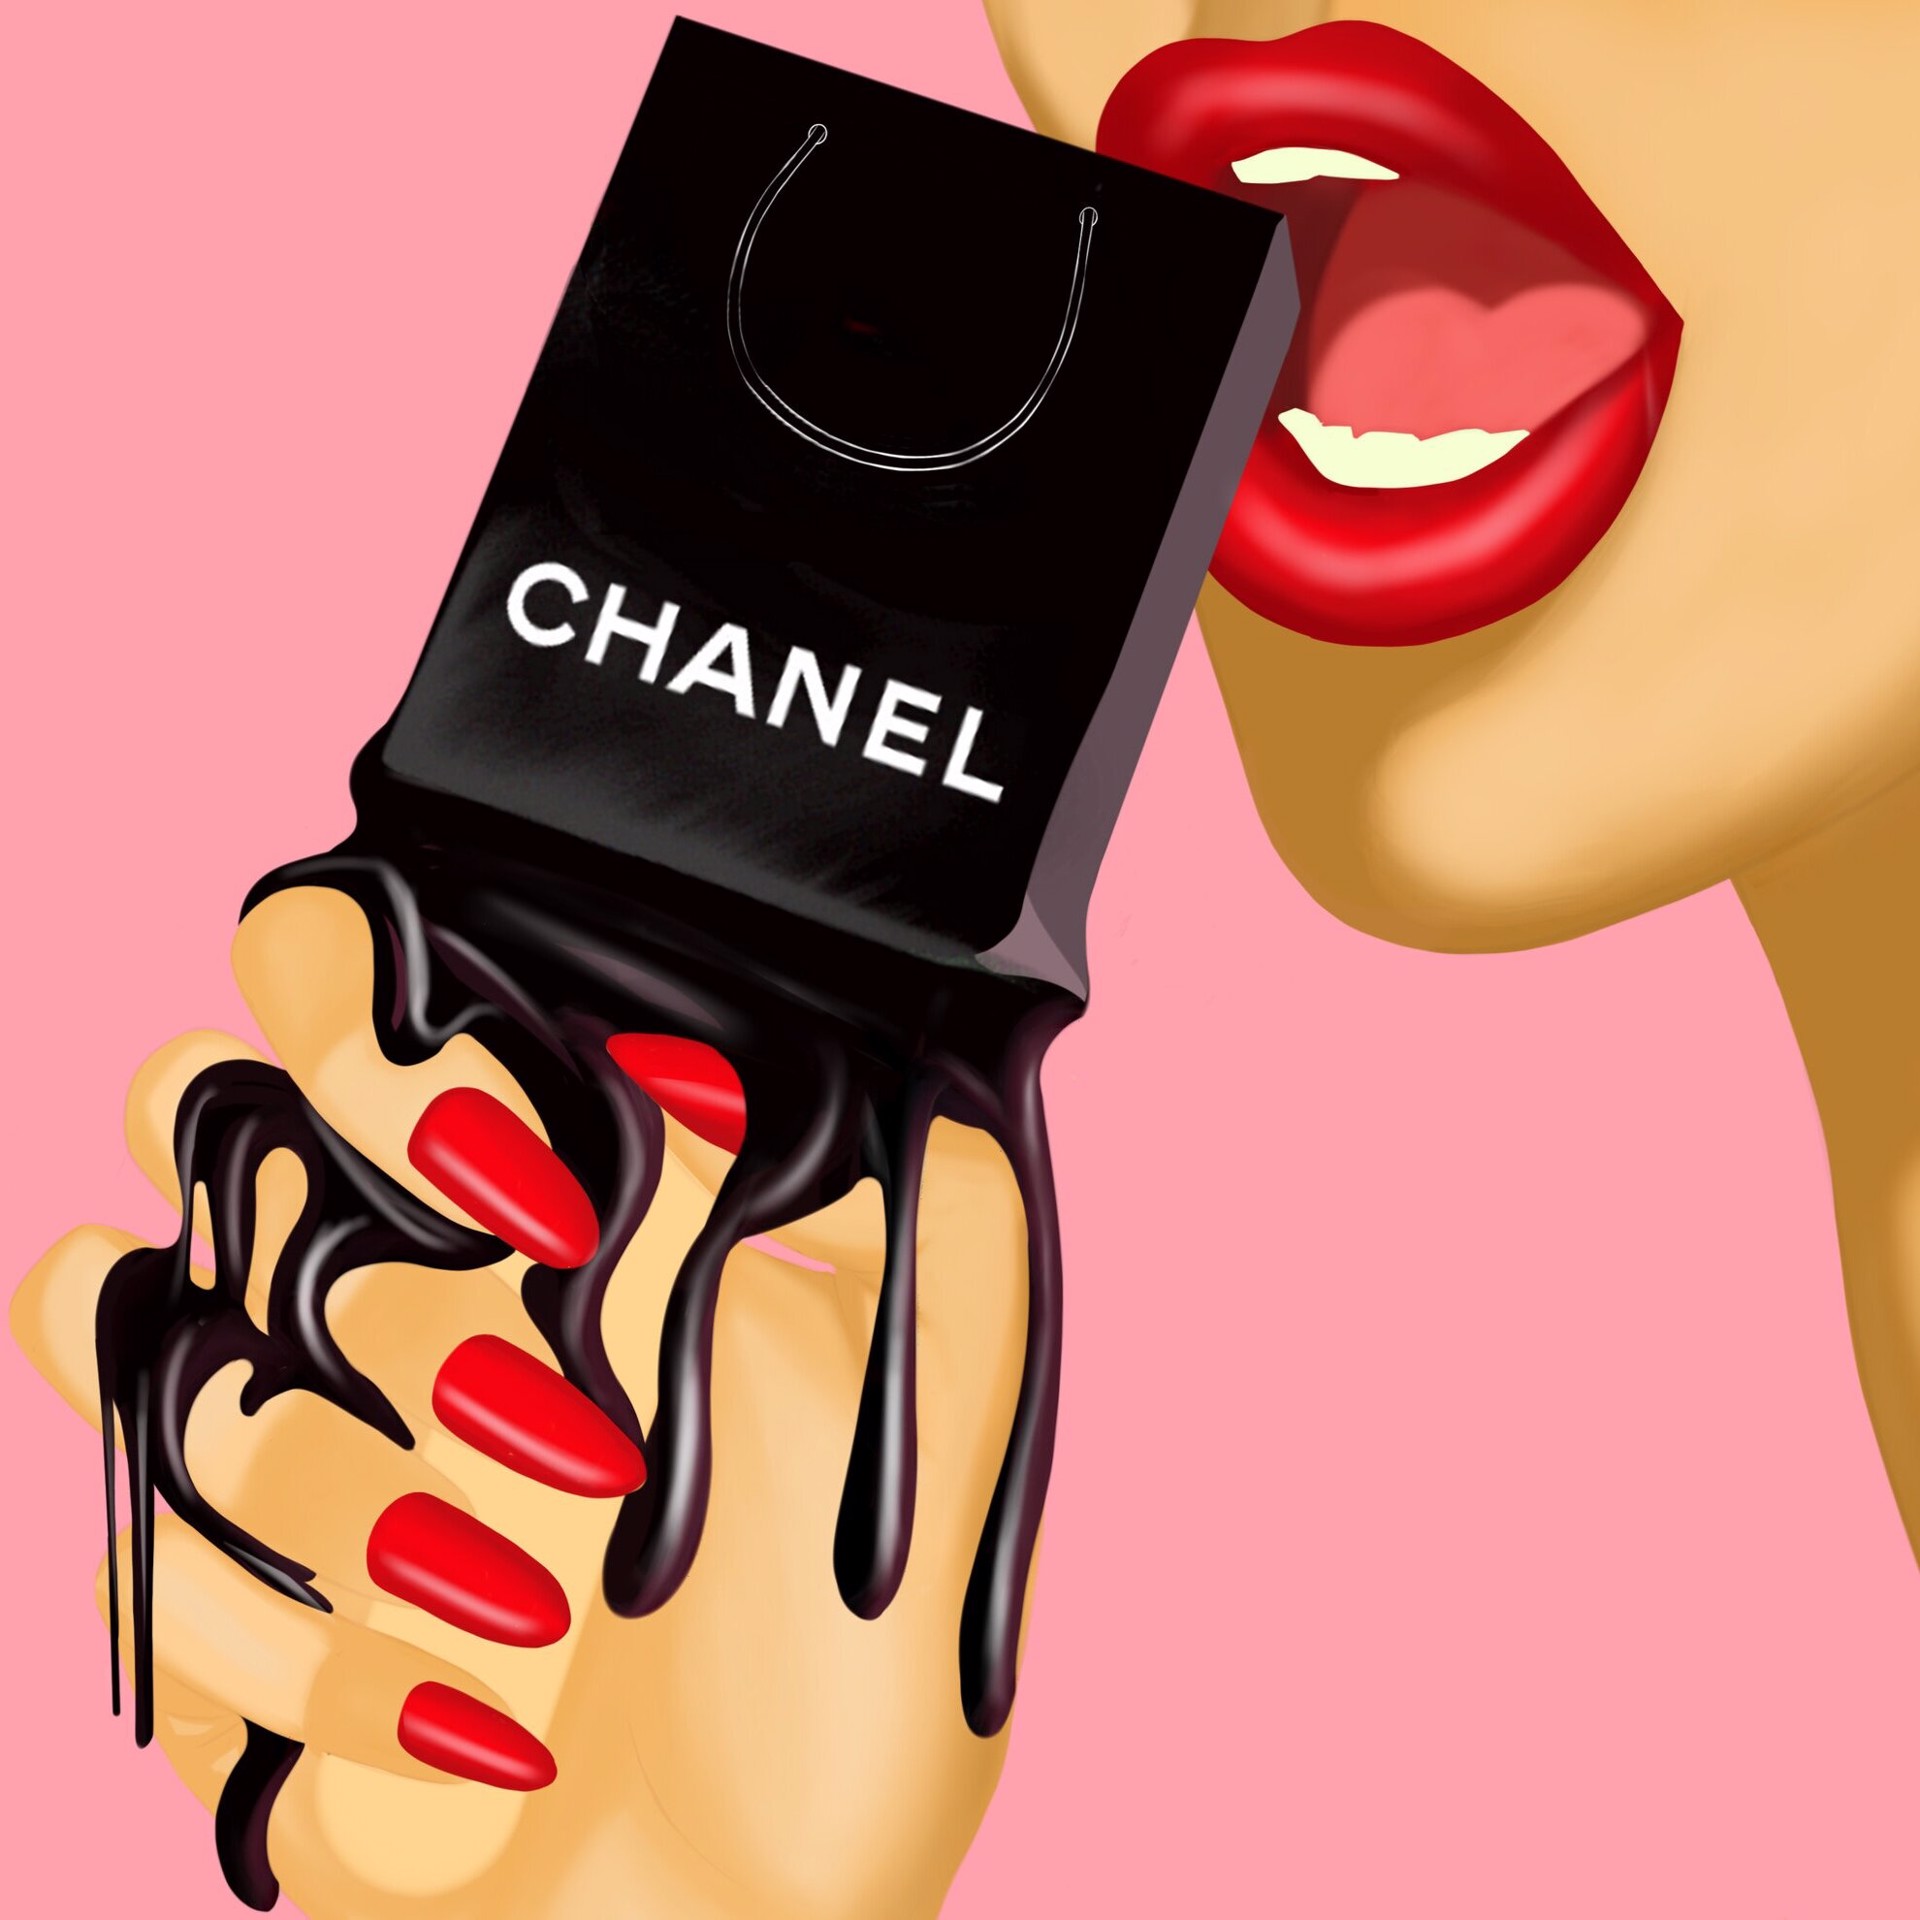 EXPENSIVE TASTE: CHANELLIPOP by Becky Rosa